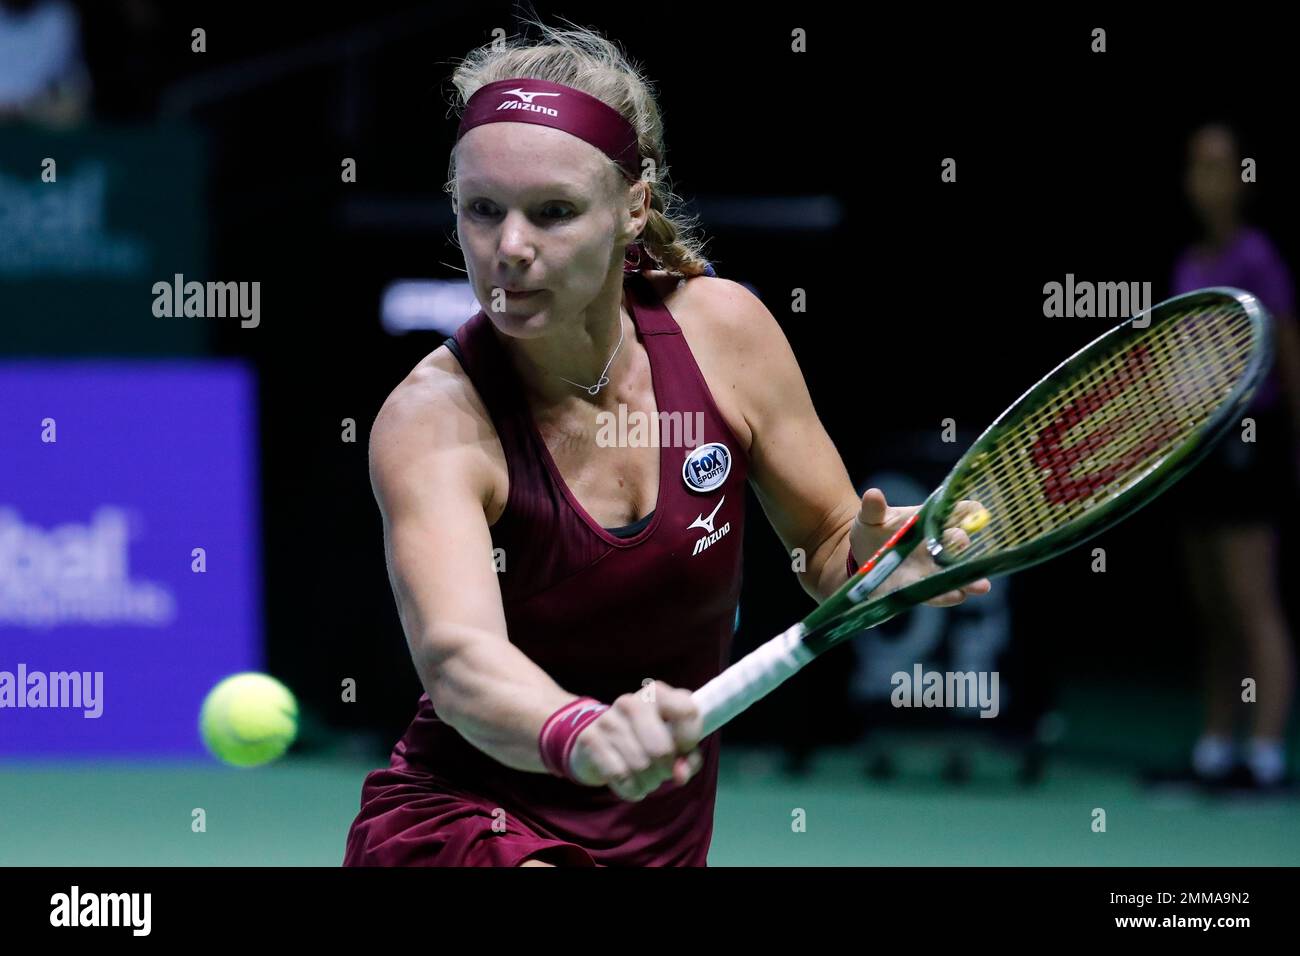 Kiki Bertens of the Netherlands returns a shot to Angelique Kerber of  Germany during their women's singles match at the WTA tennis tournament in  Singapore on Monday, Oct. 22, 2018. (AP Photo/Vincent